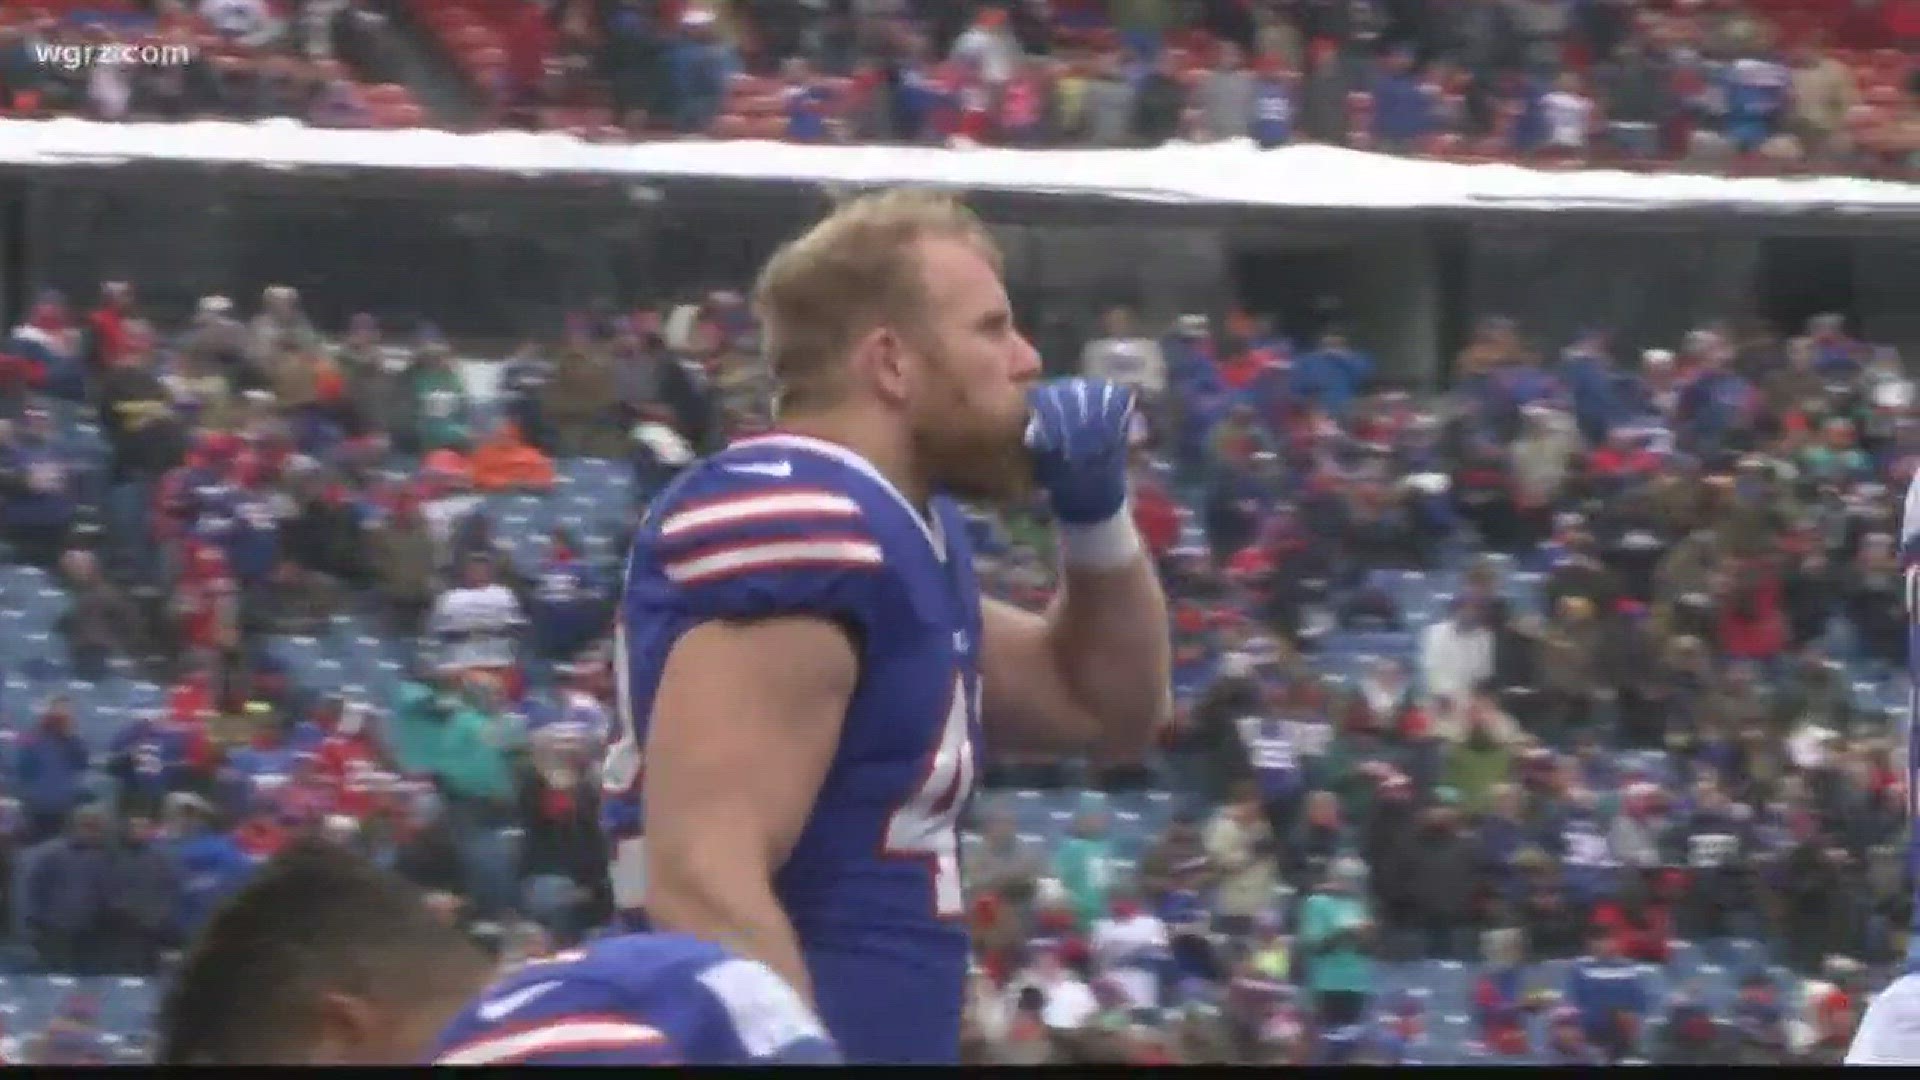 Bills bring together faith and football